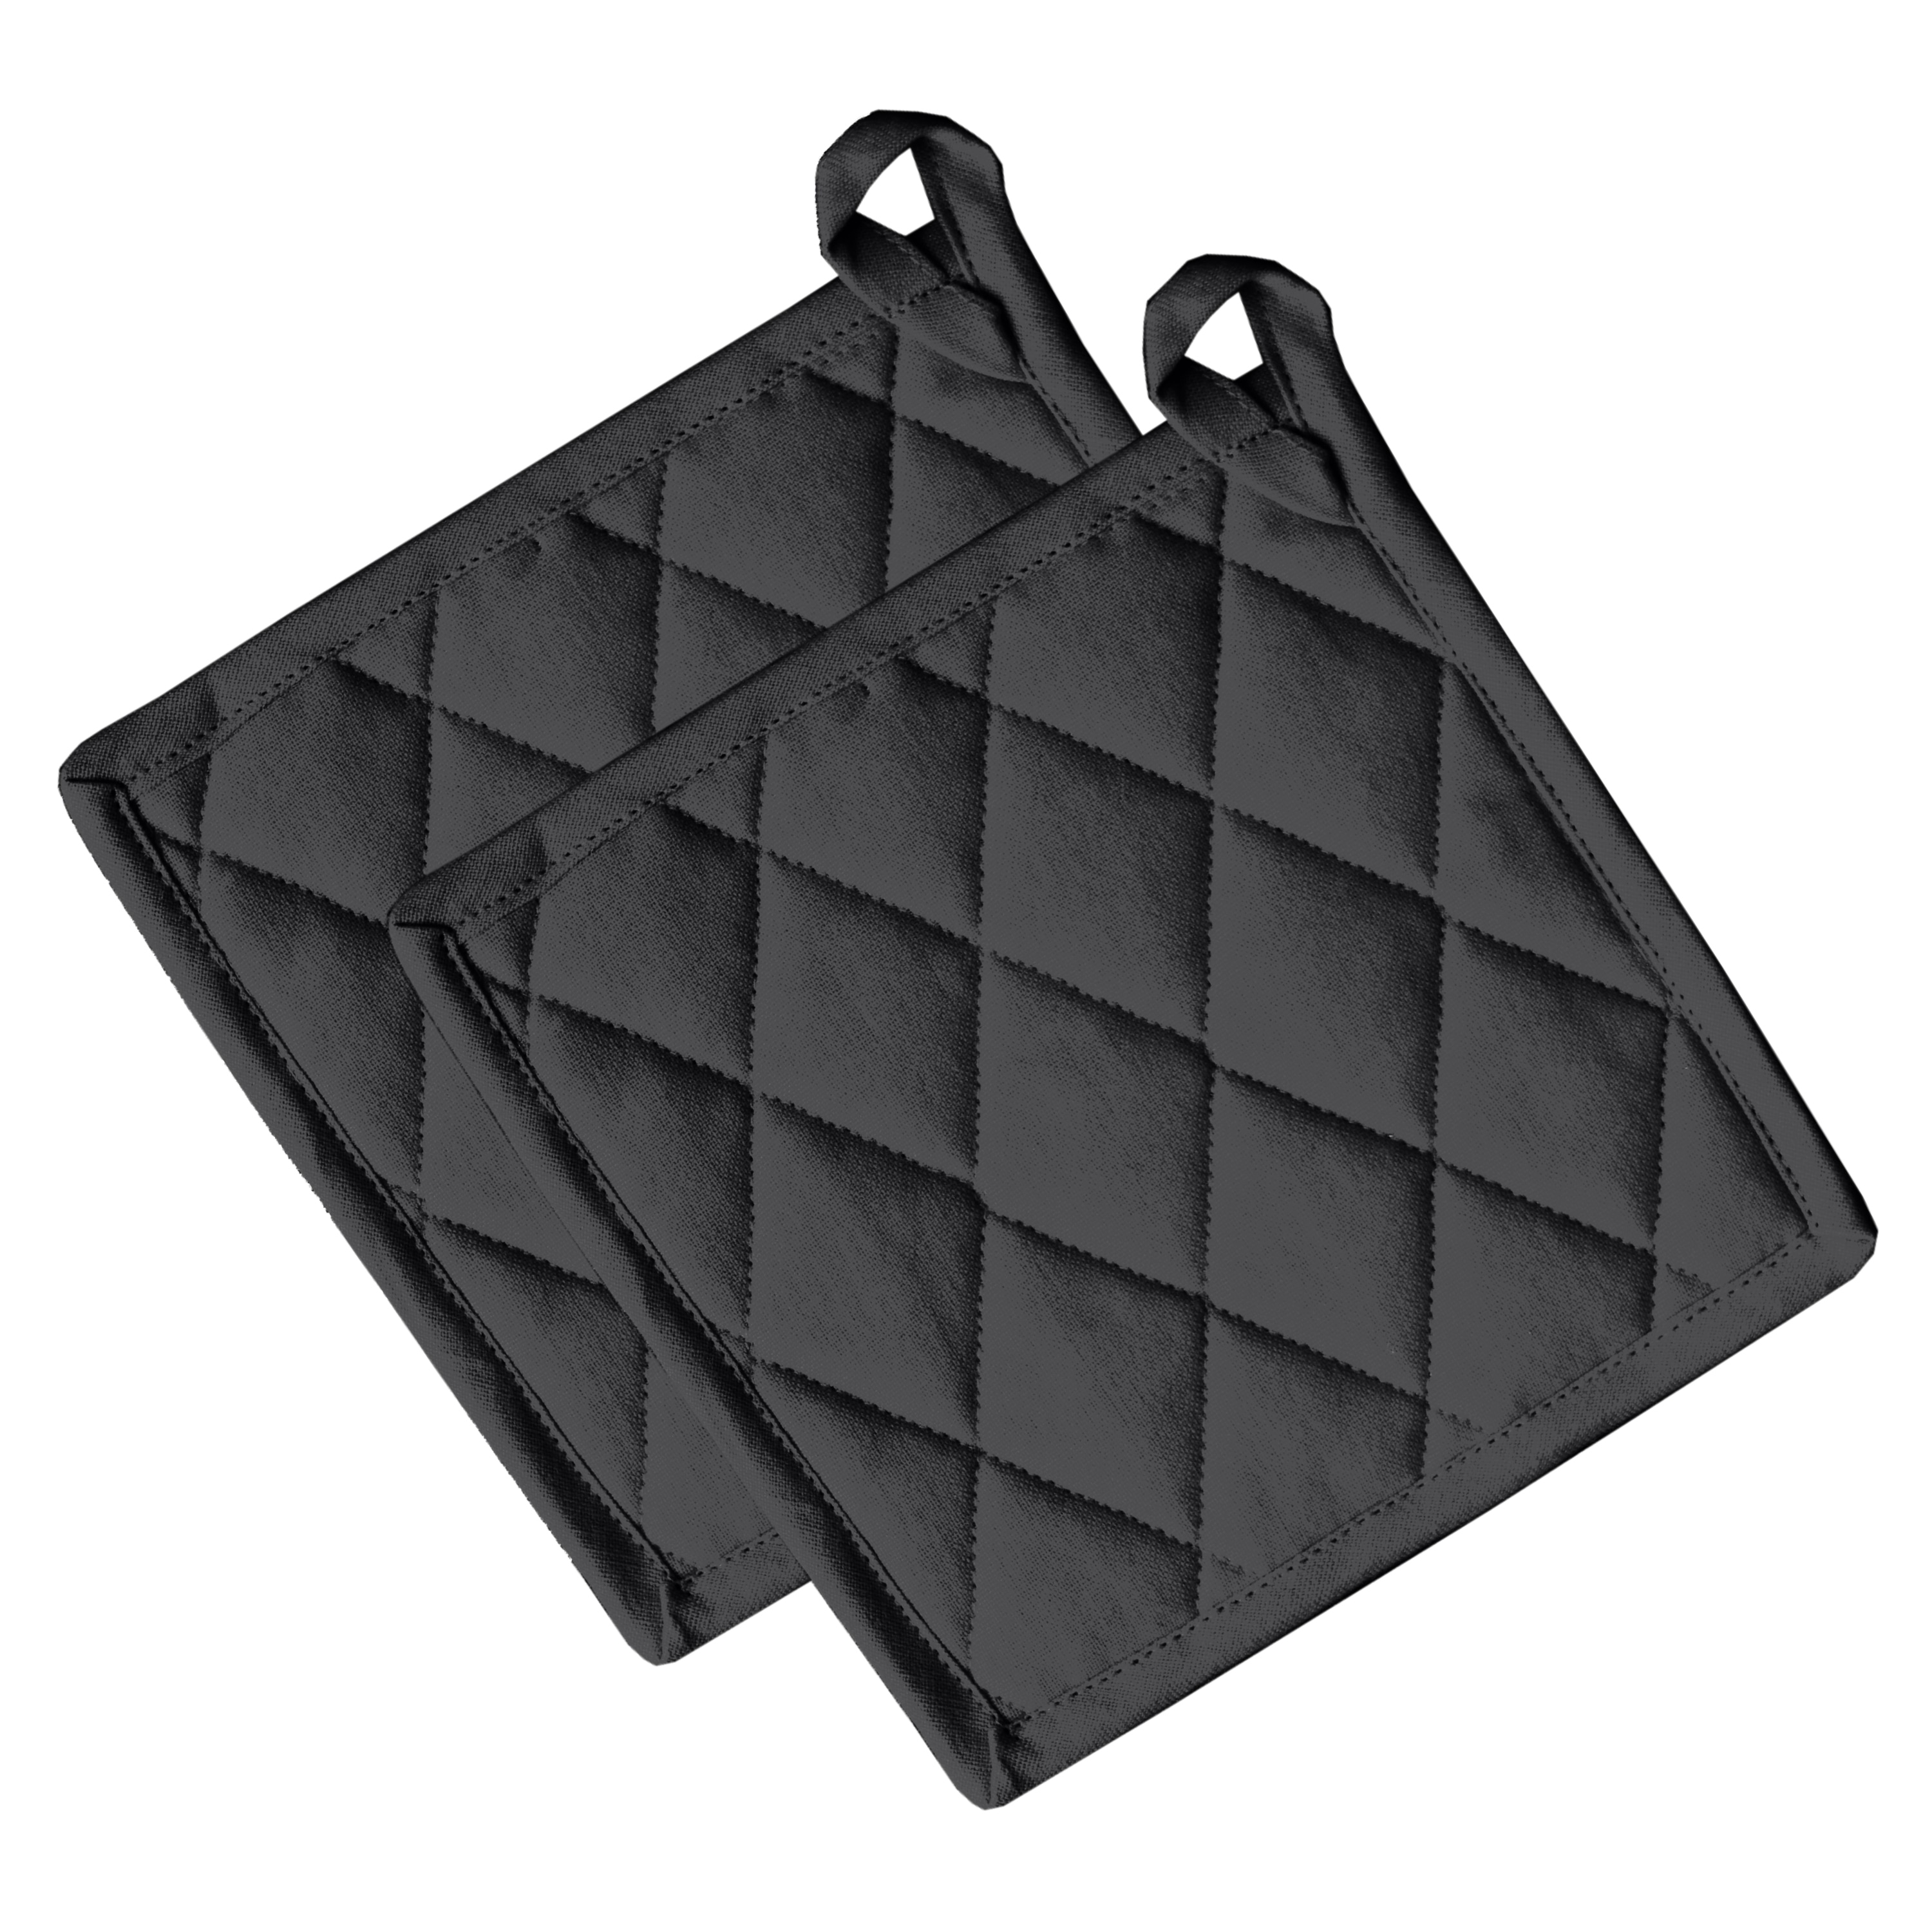 https://ak1.ostkcdn.com/images/products/is/images/direct/8b486beaf41595357532f89a55a1960ebccecedb/Fabstyles-Solo-Waffle-Cotton-Oven-Mitt-%26-Pot-Holder-Set-of-4.jpg